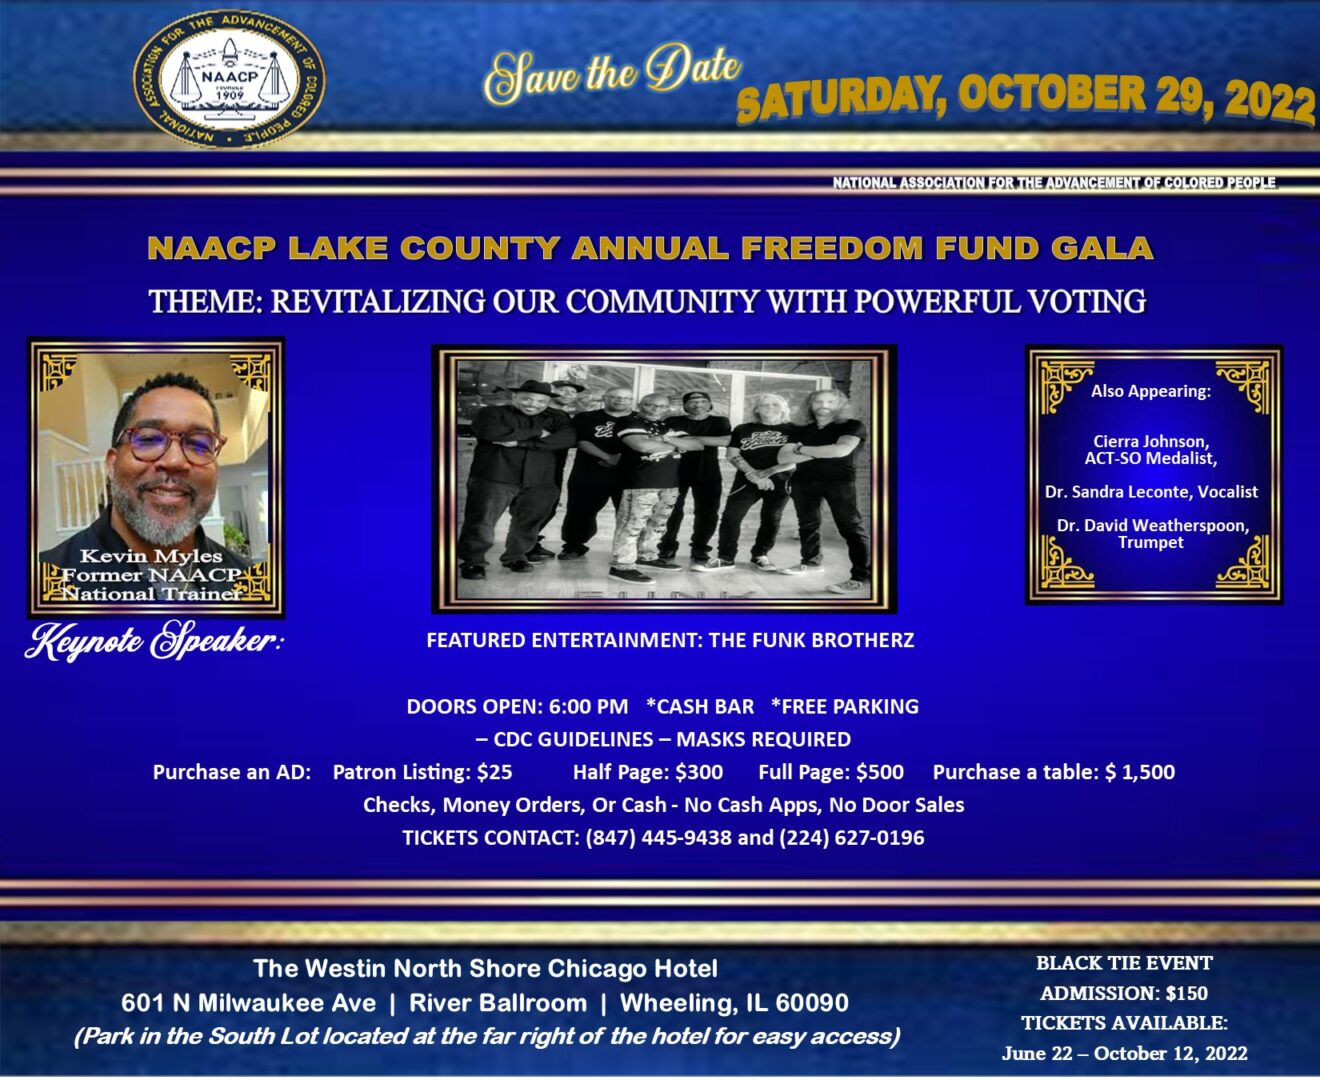 A screen shot of the naacp lake county annual freedom fund gala.